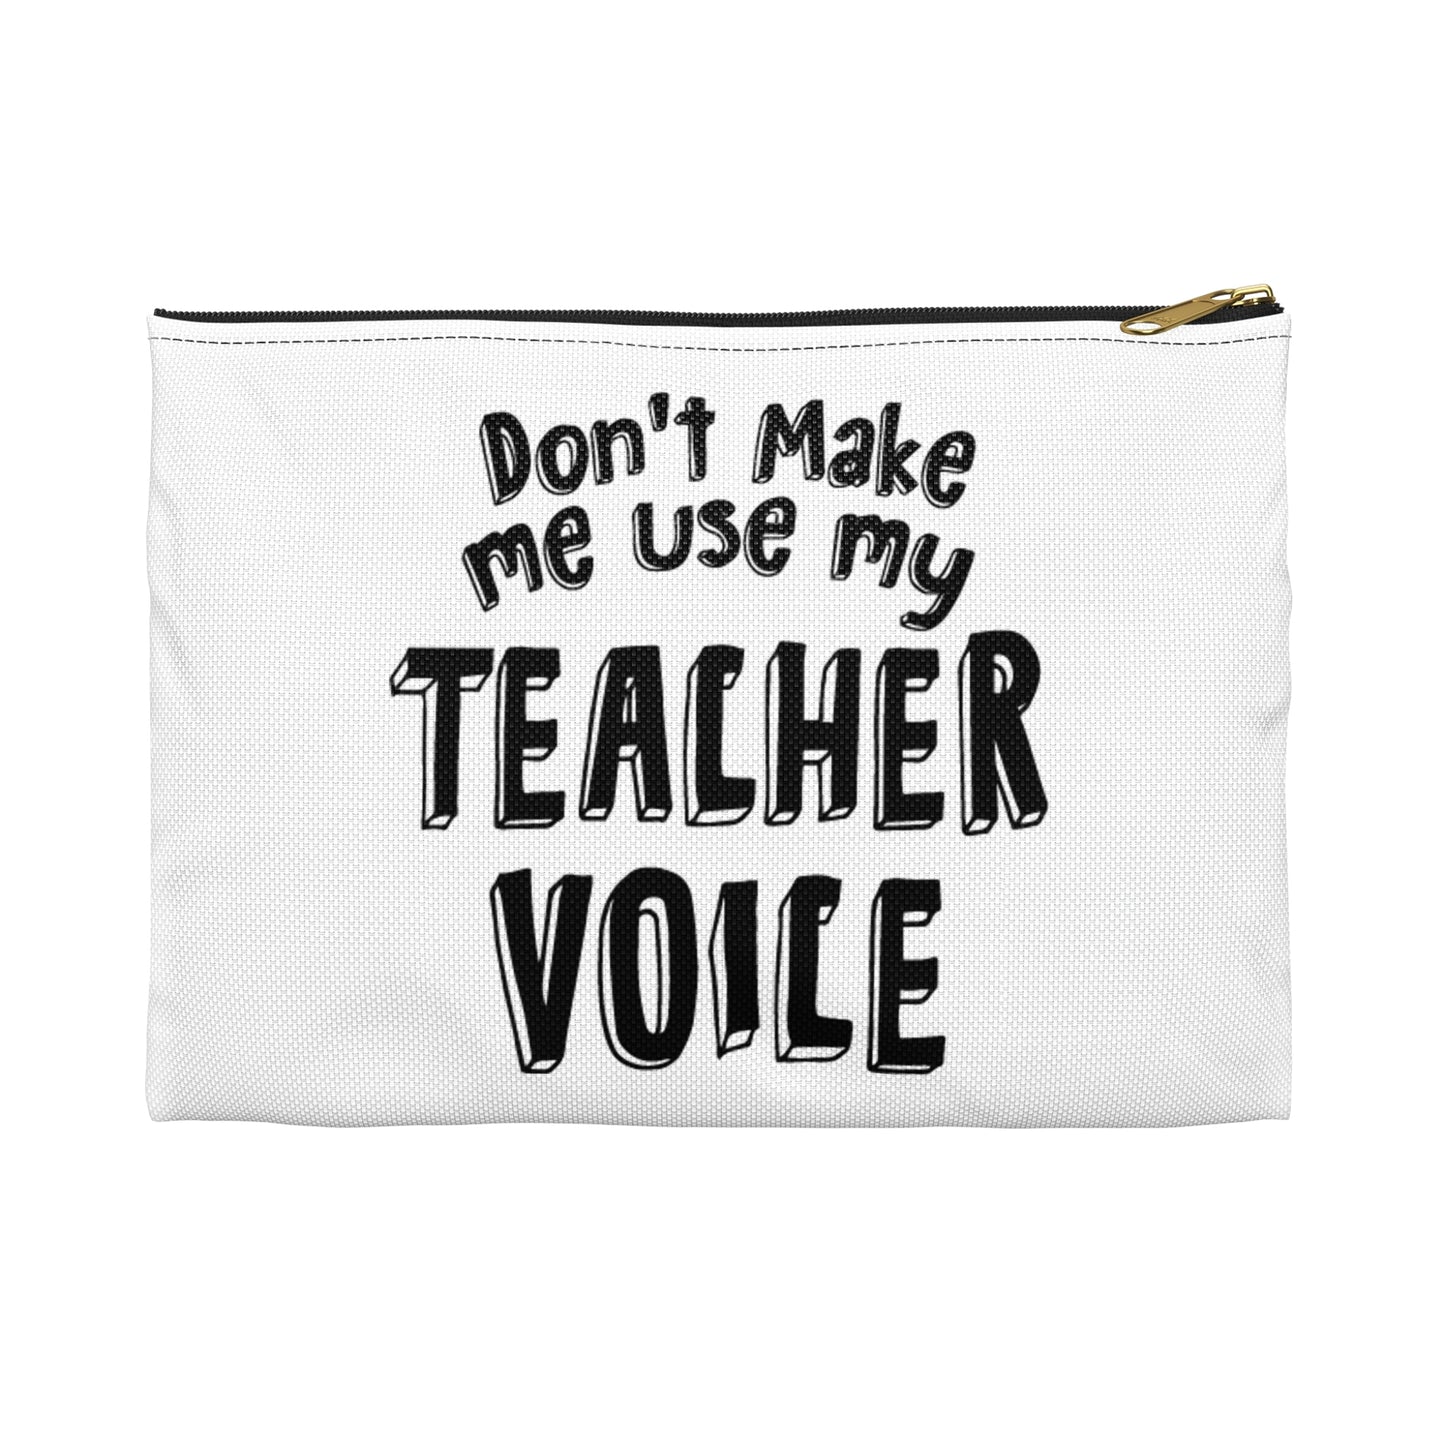 Don't make me use my teacher voice Accessory Pouch